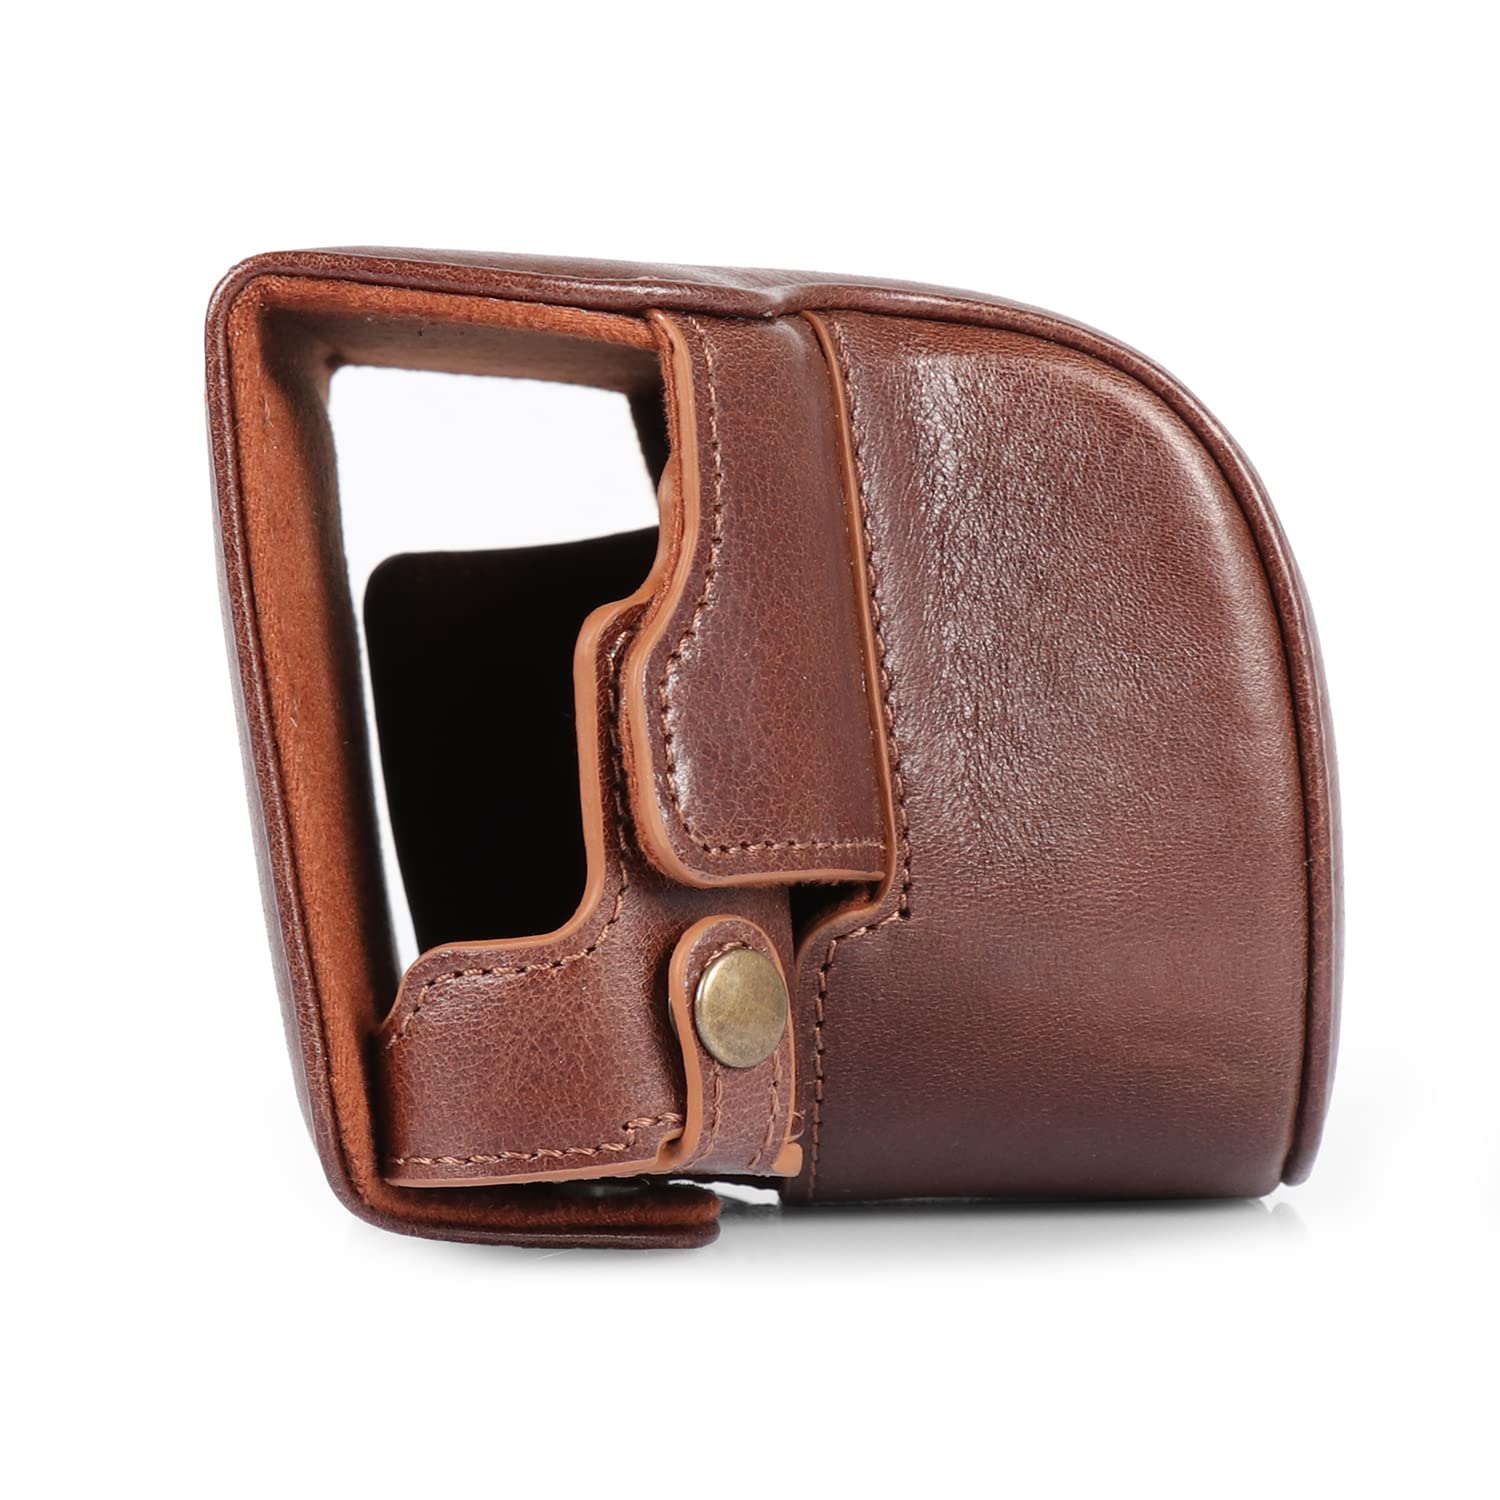 MegaGear MG1606 Ever Ready Genuine Leather Camera Case Compatible with Leica D-Lux 7 - Brown, One Size